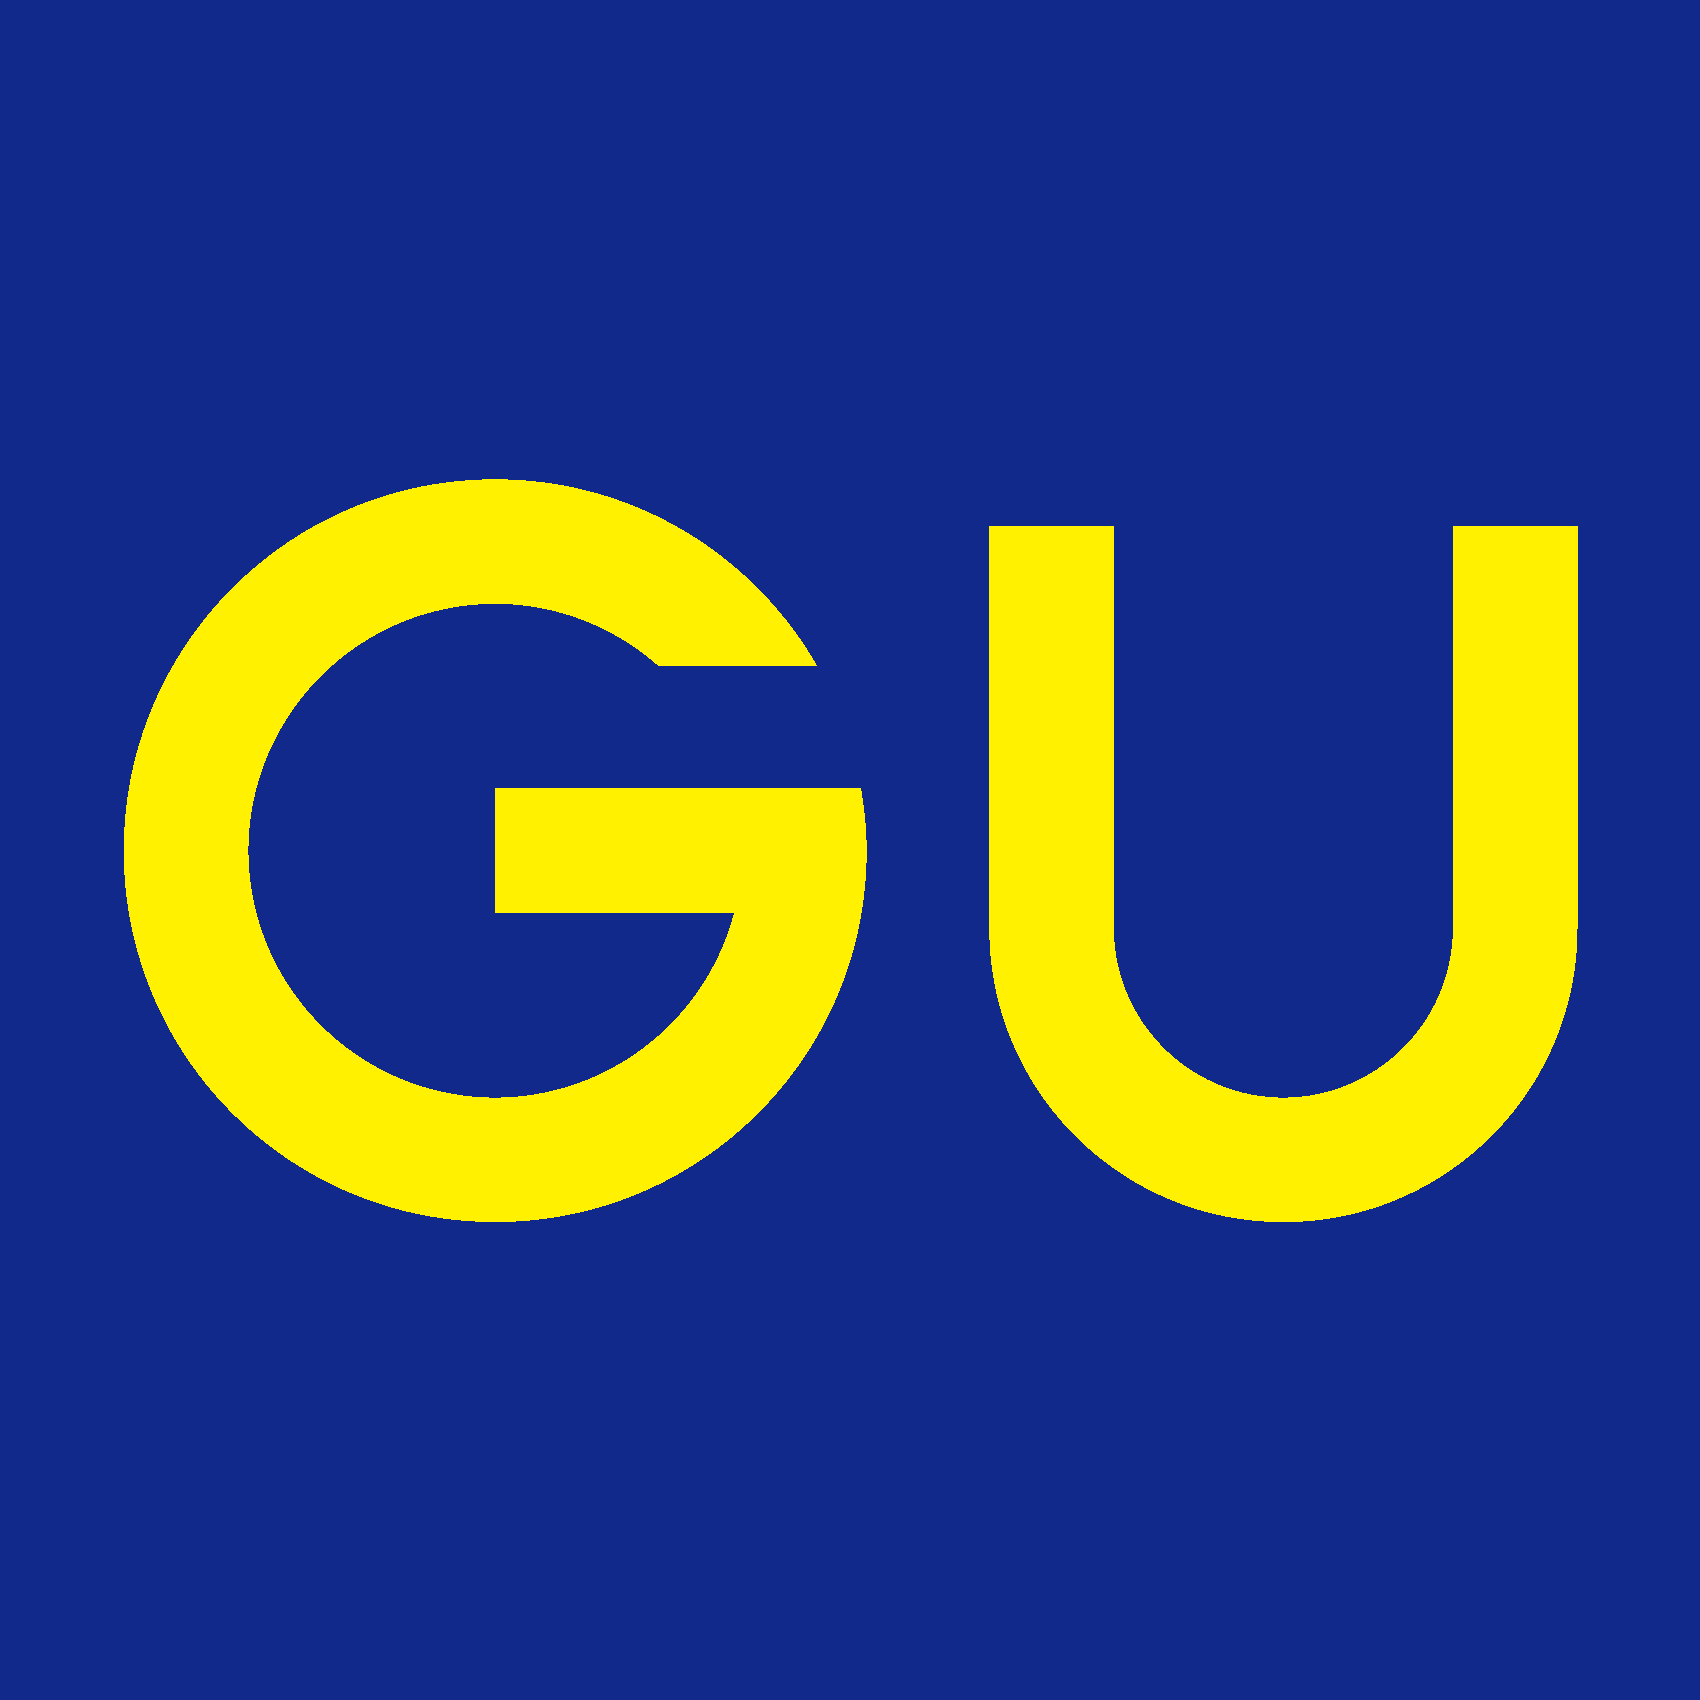 Gu Monogram Stock Photos and Pictures - 1,788 Images | Shutterstock